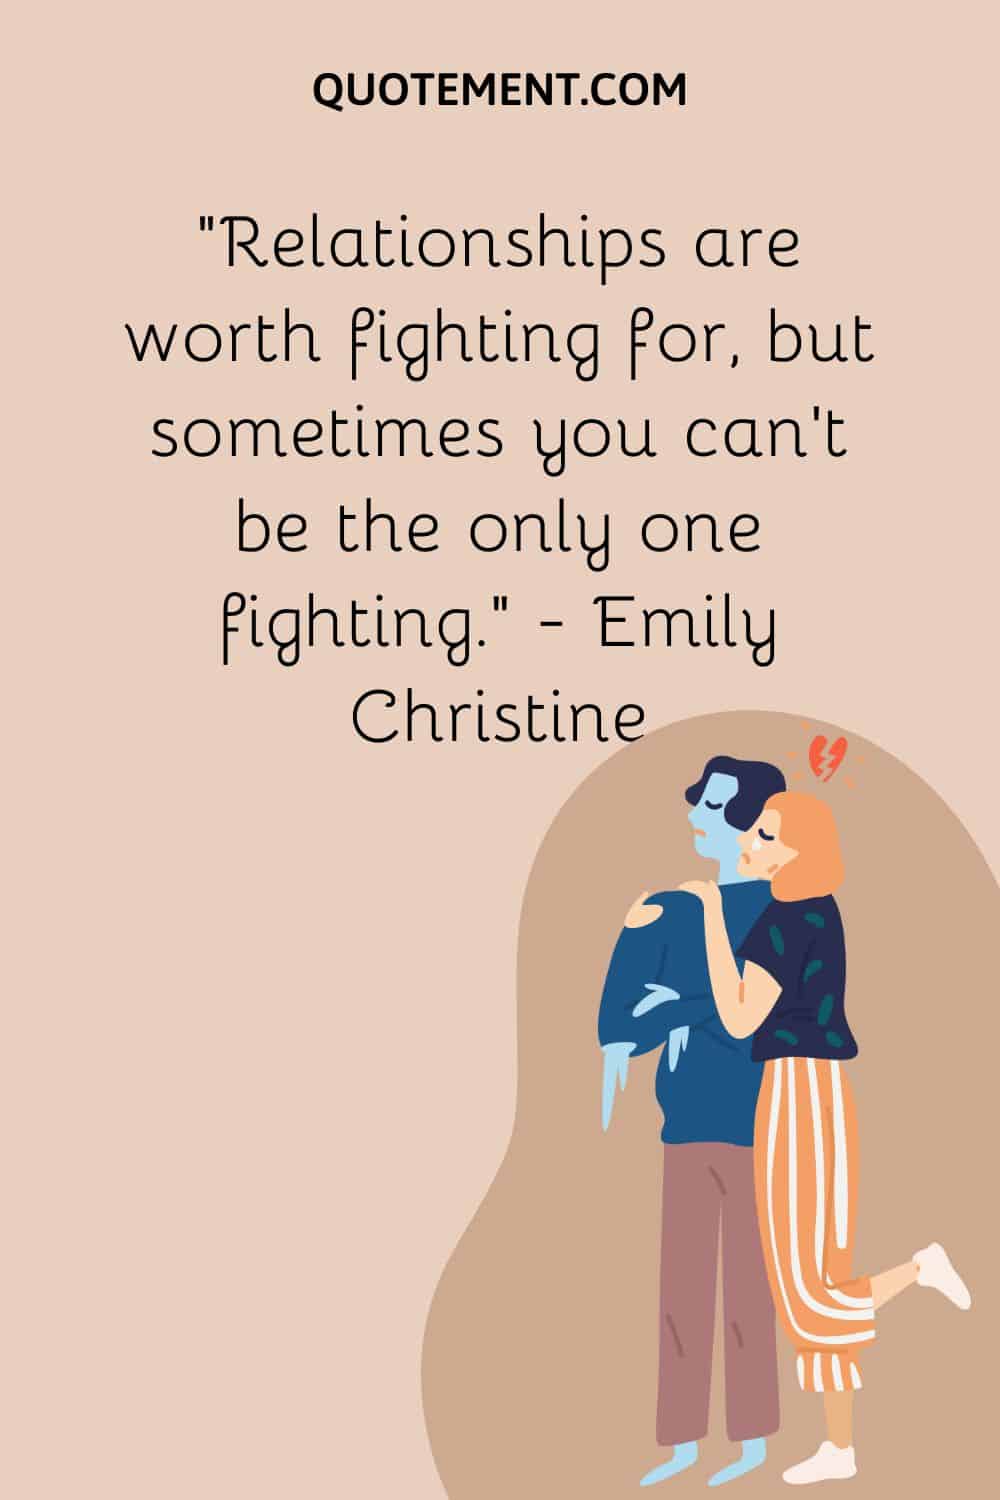 Relationships are worth fighting for, but sometimes you can’t be the only one fighting